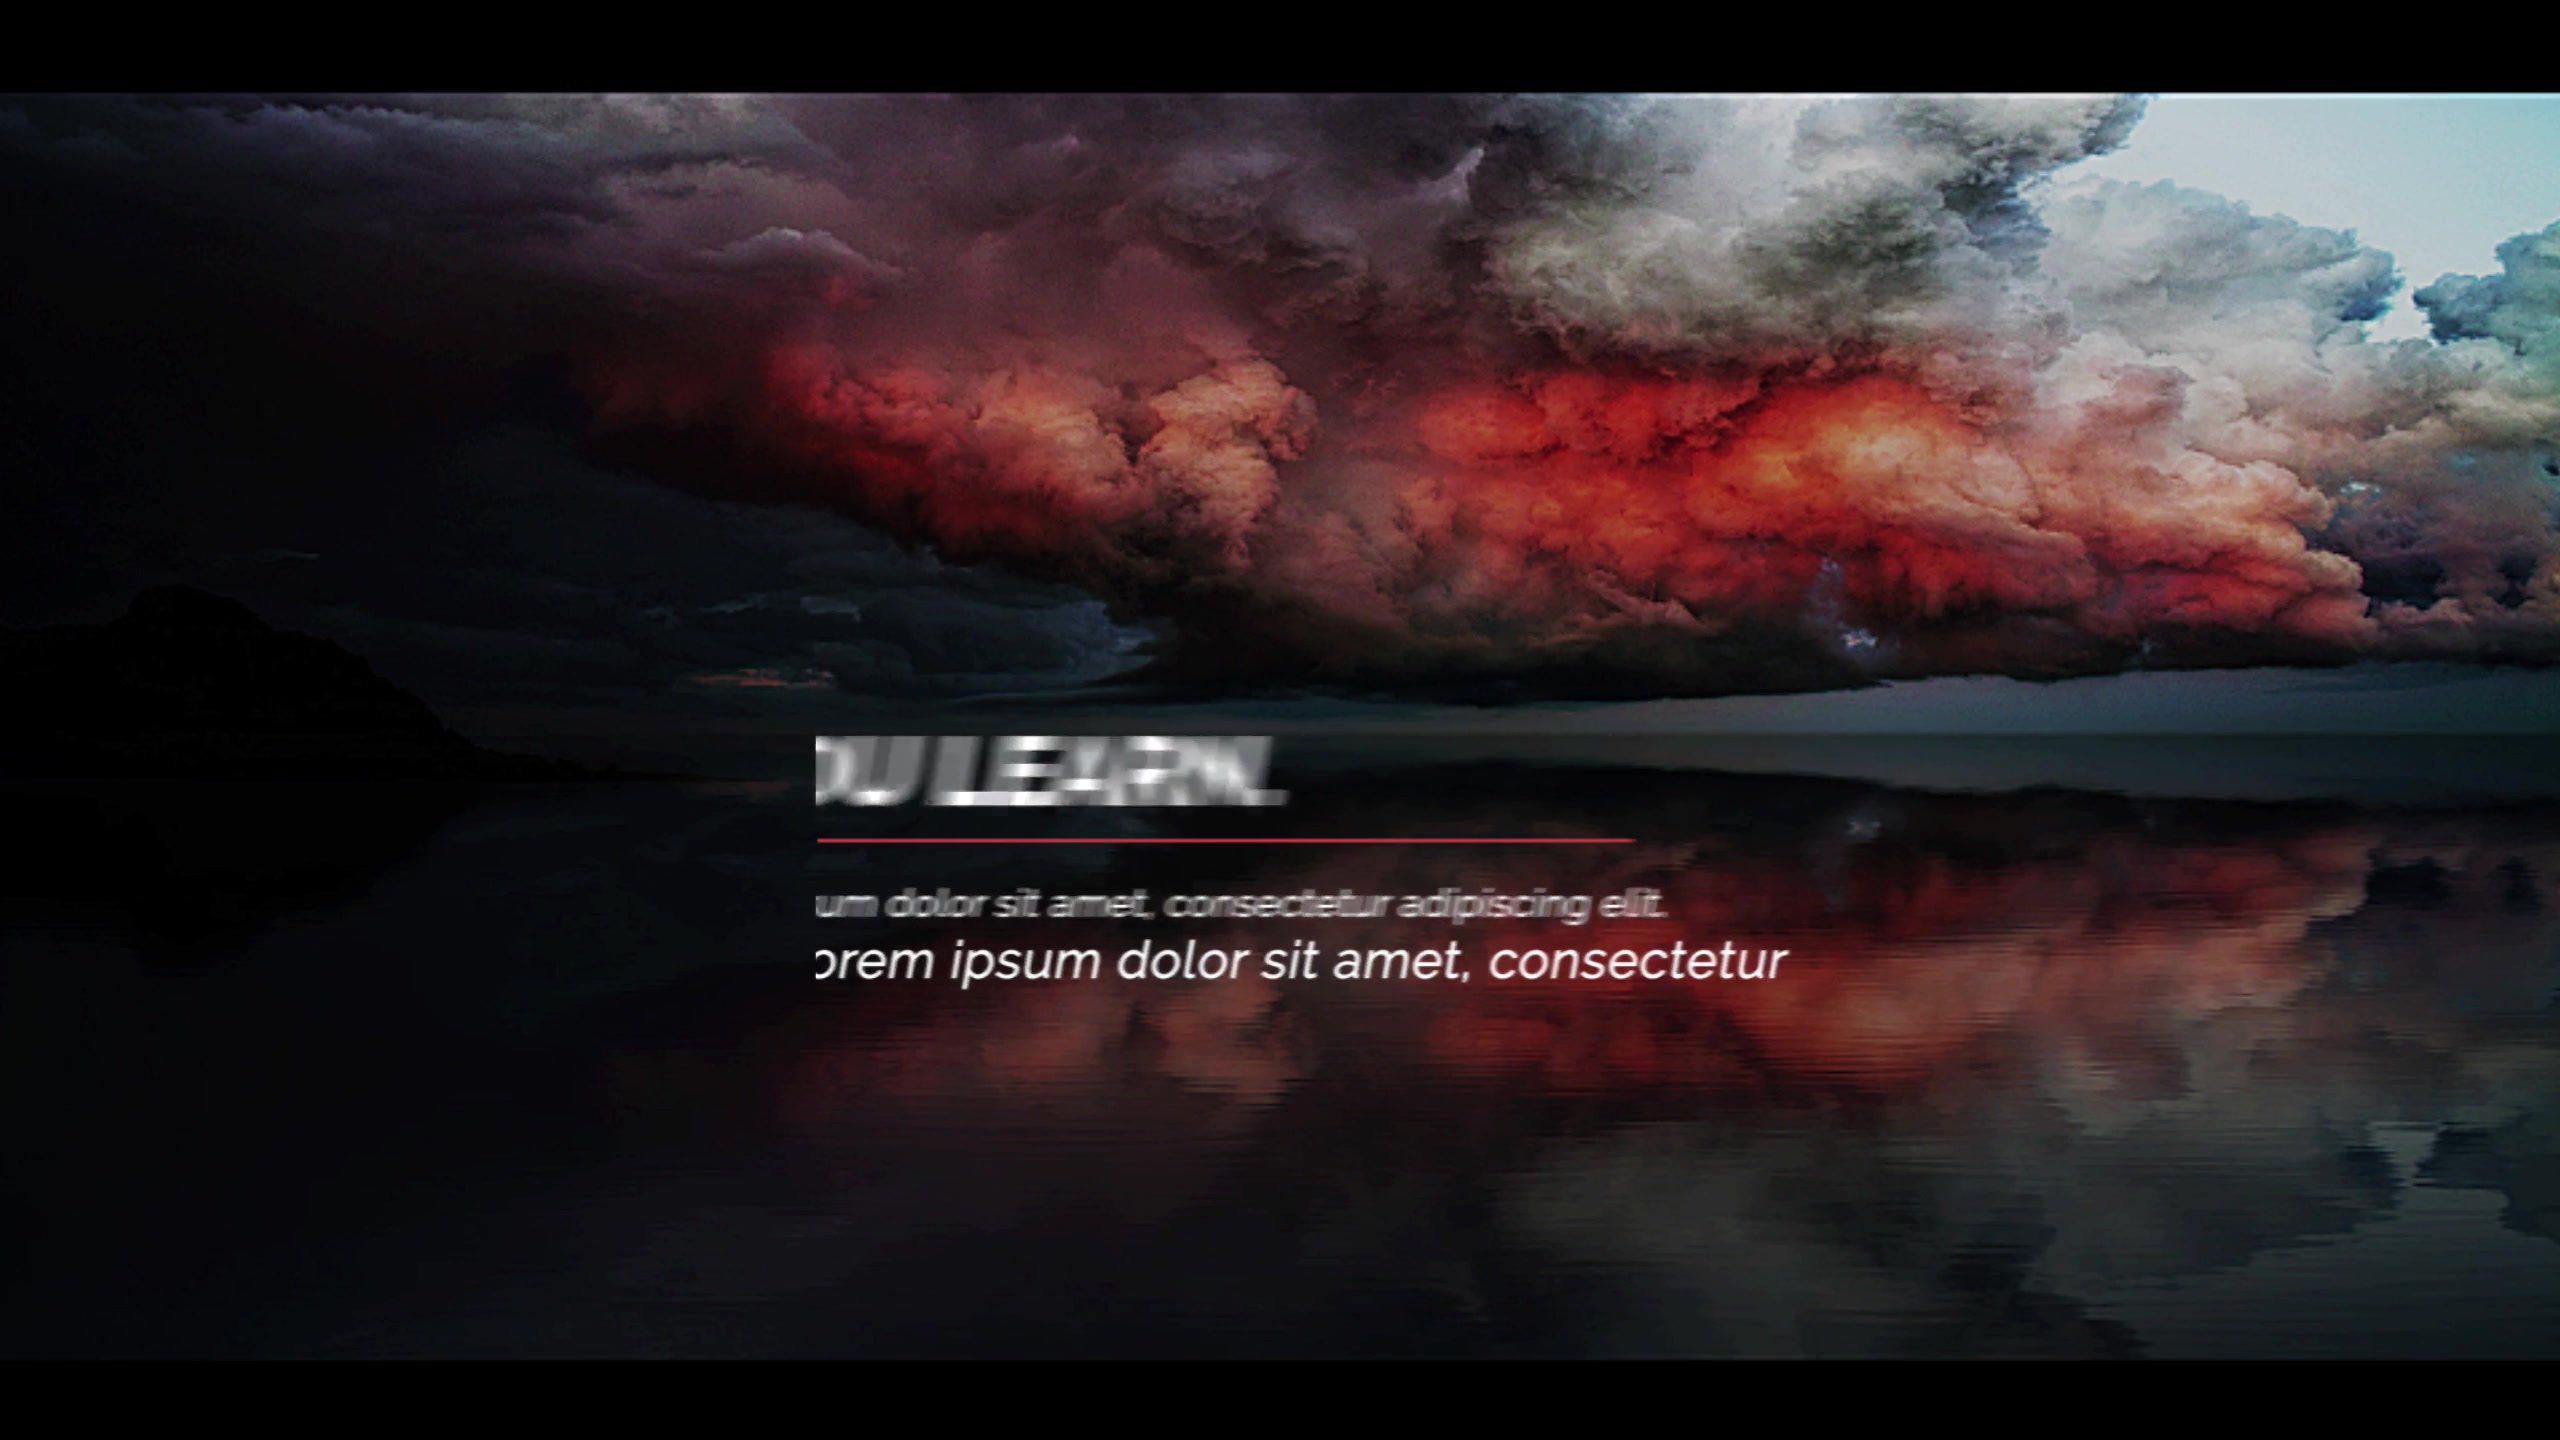 Epic Titles for Premiere - Download Videohive 21874438